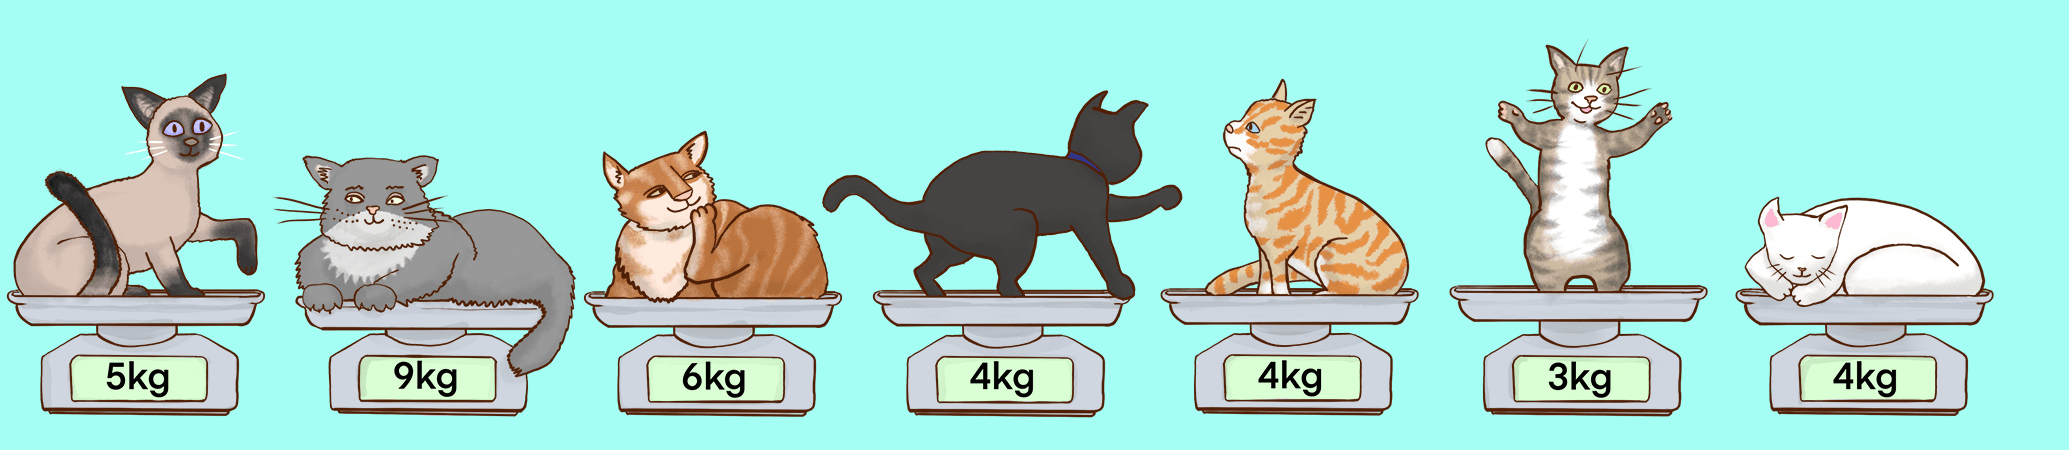 Seven different cats sitting on scales with weights, respectively: 
        5kg, 9kg, 6kg, 4kg, 4kg, 3kg, 4kg